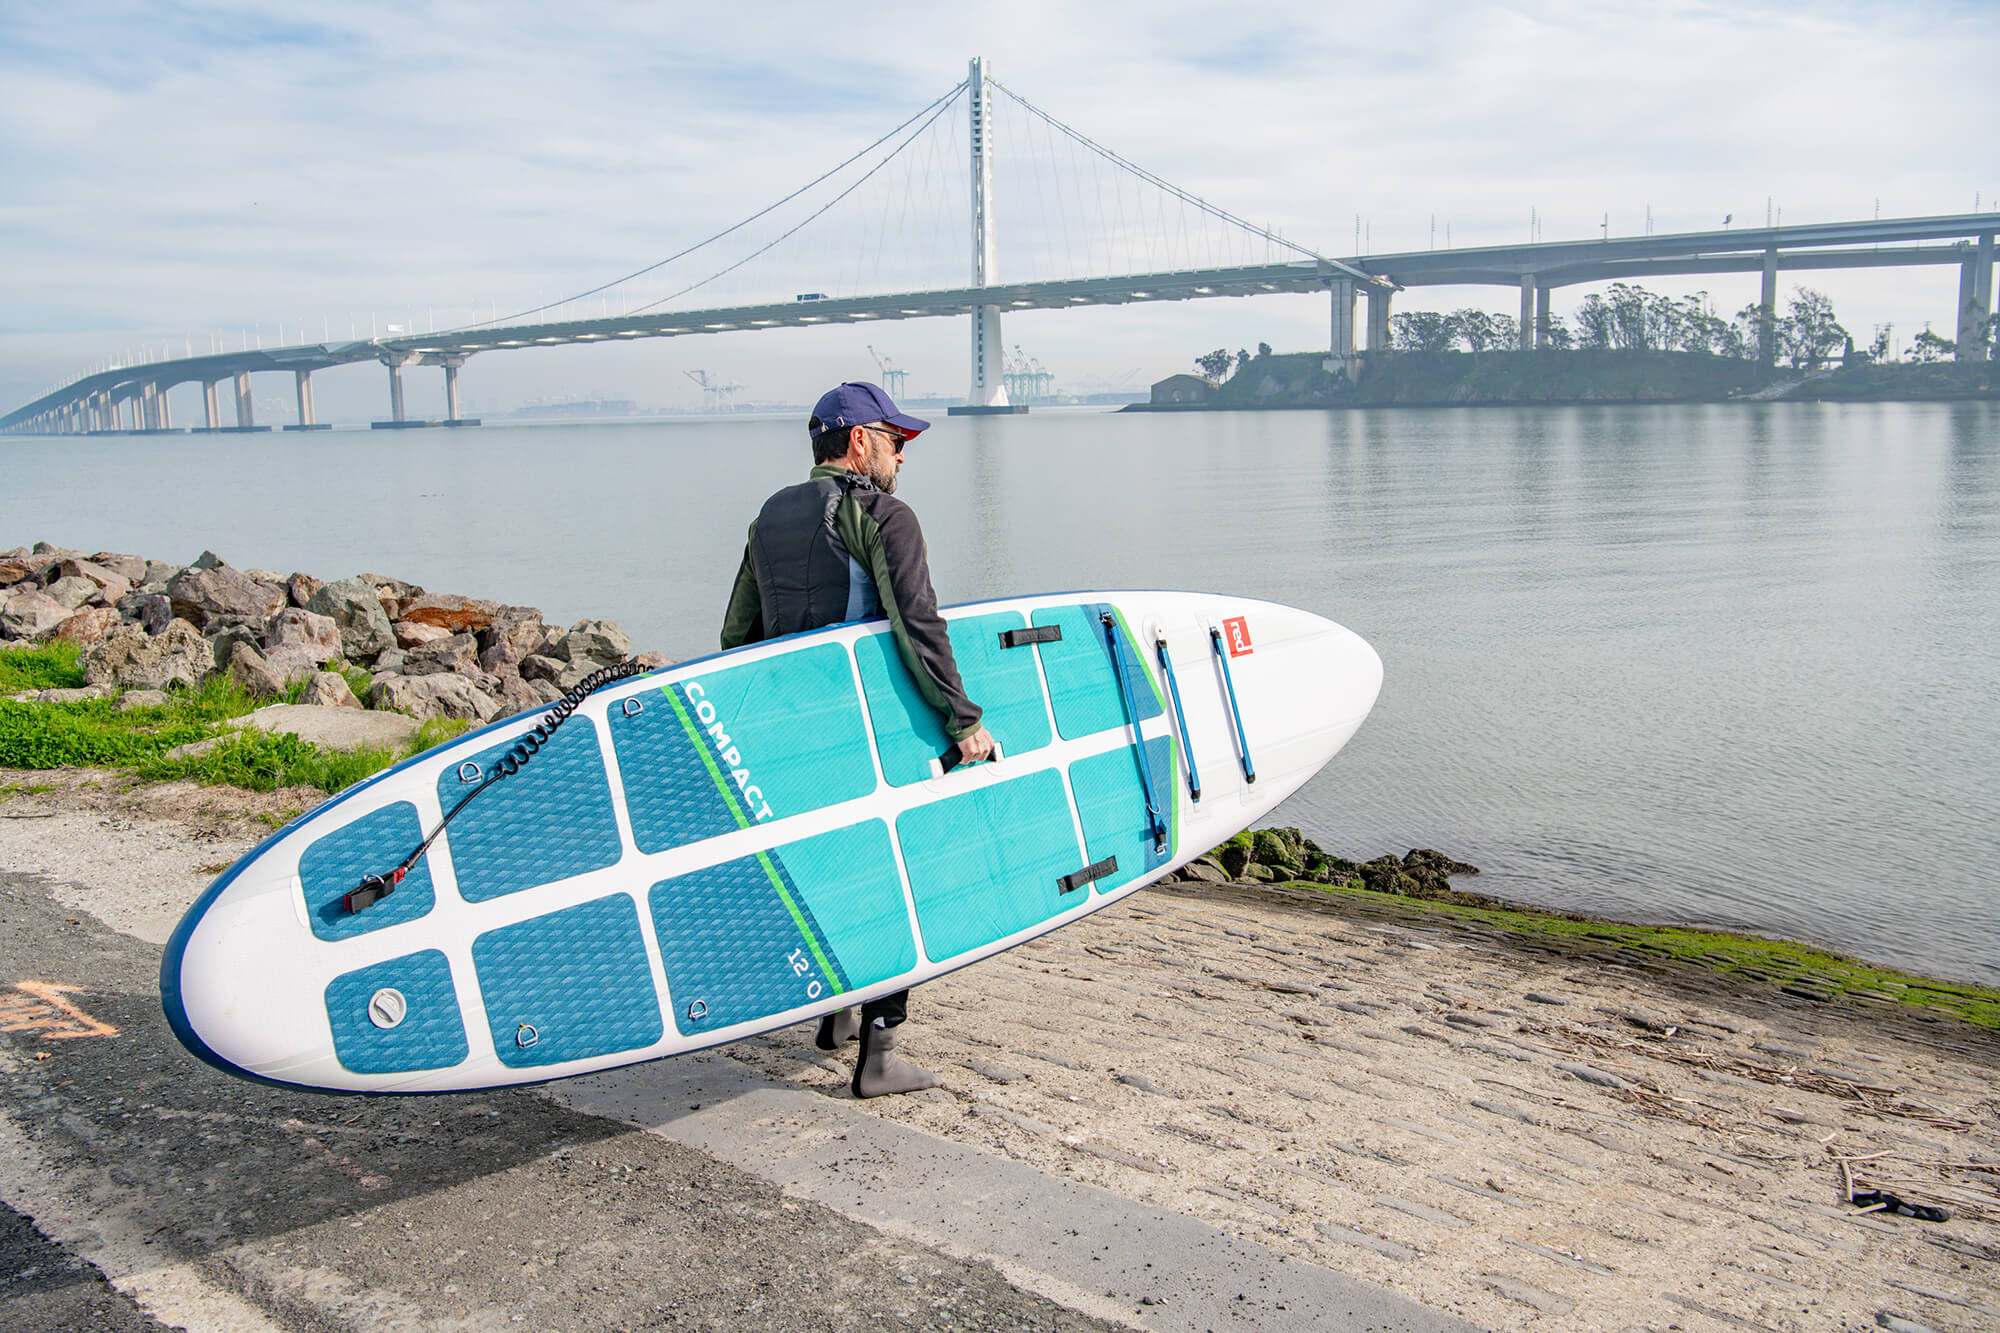 Man Holding An RPC 12 Compact SUP On The Shore In front Of The San Mateo–Hayward Bridge